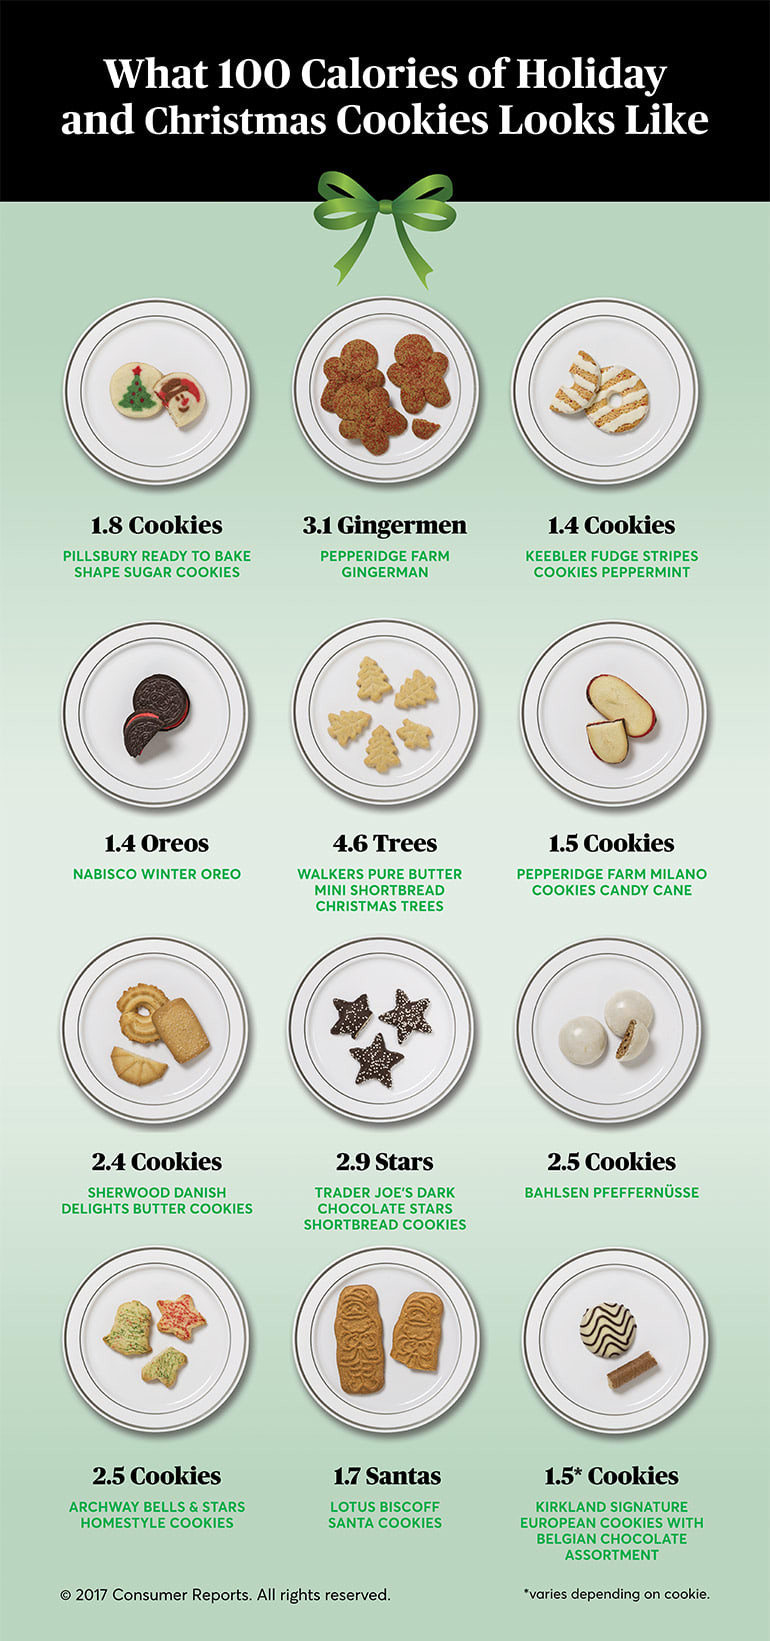 Calories In Christmas Cookies
 100 Calories of Holiday and Christmas Cookies Consumer